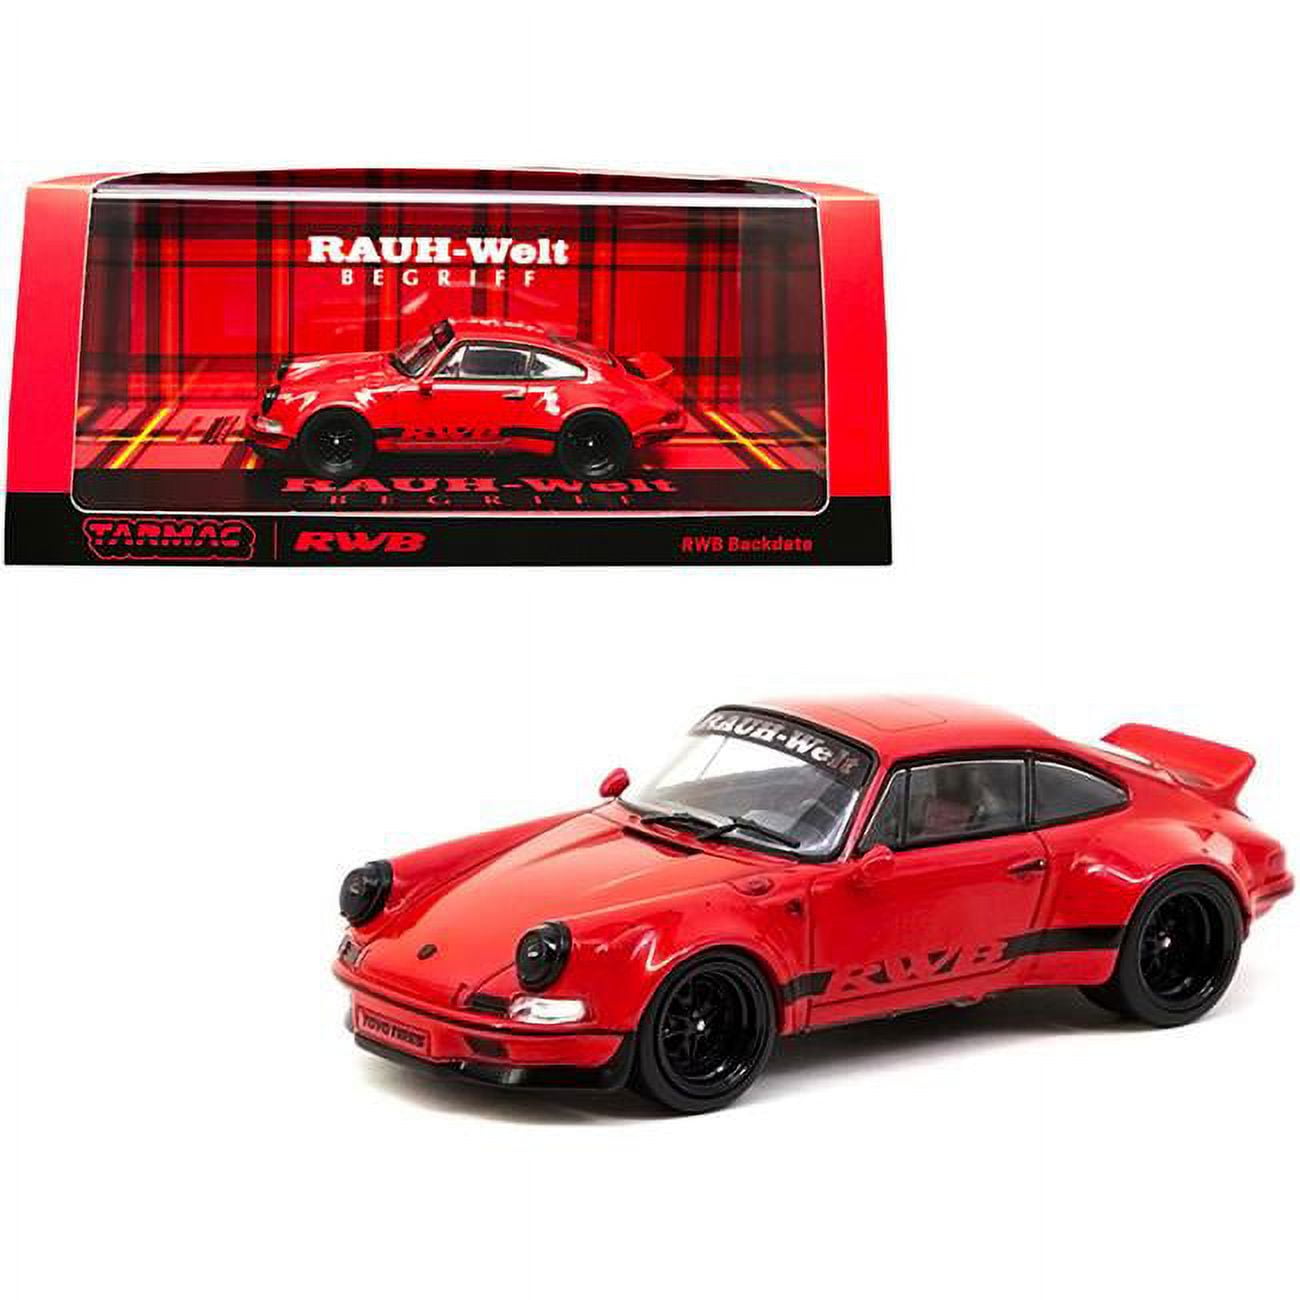 T43-018-RE 1-43 Scale RAUH-Welt WB Backdate Diecast Model Car, Red & Black -  Tarmac Works